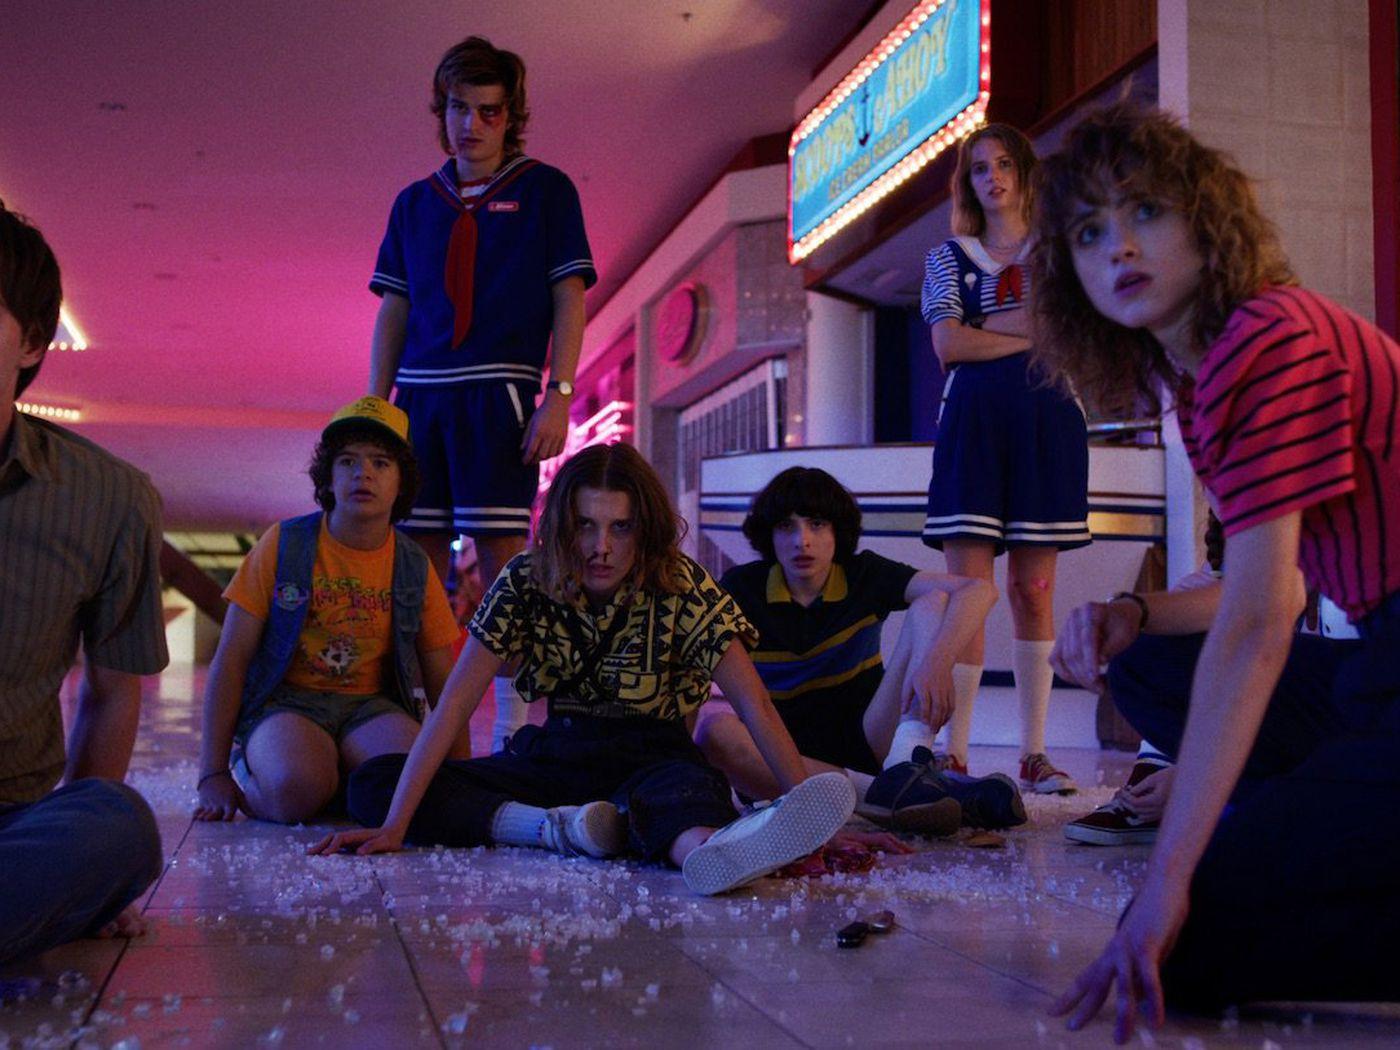 Stranger Things season 3 trailer: the Upside Down isn't done with.